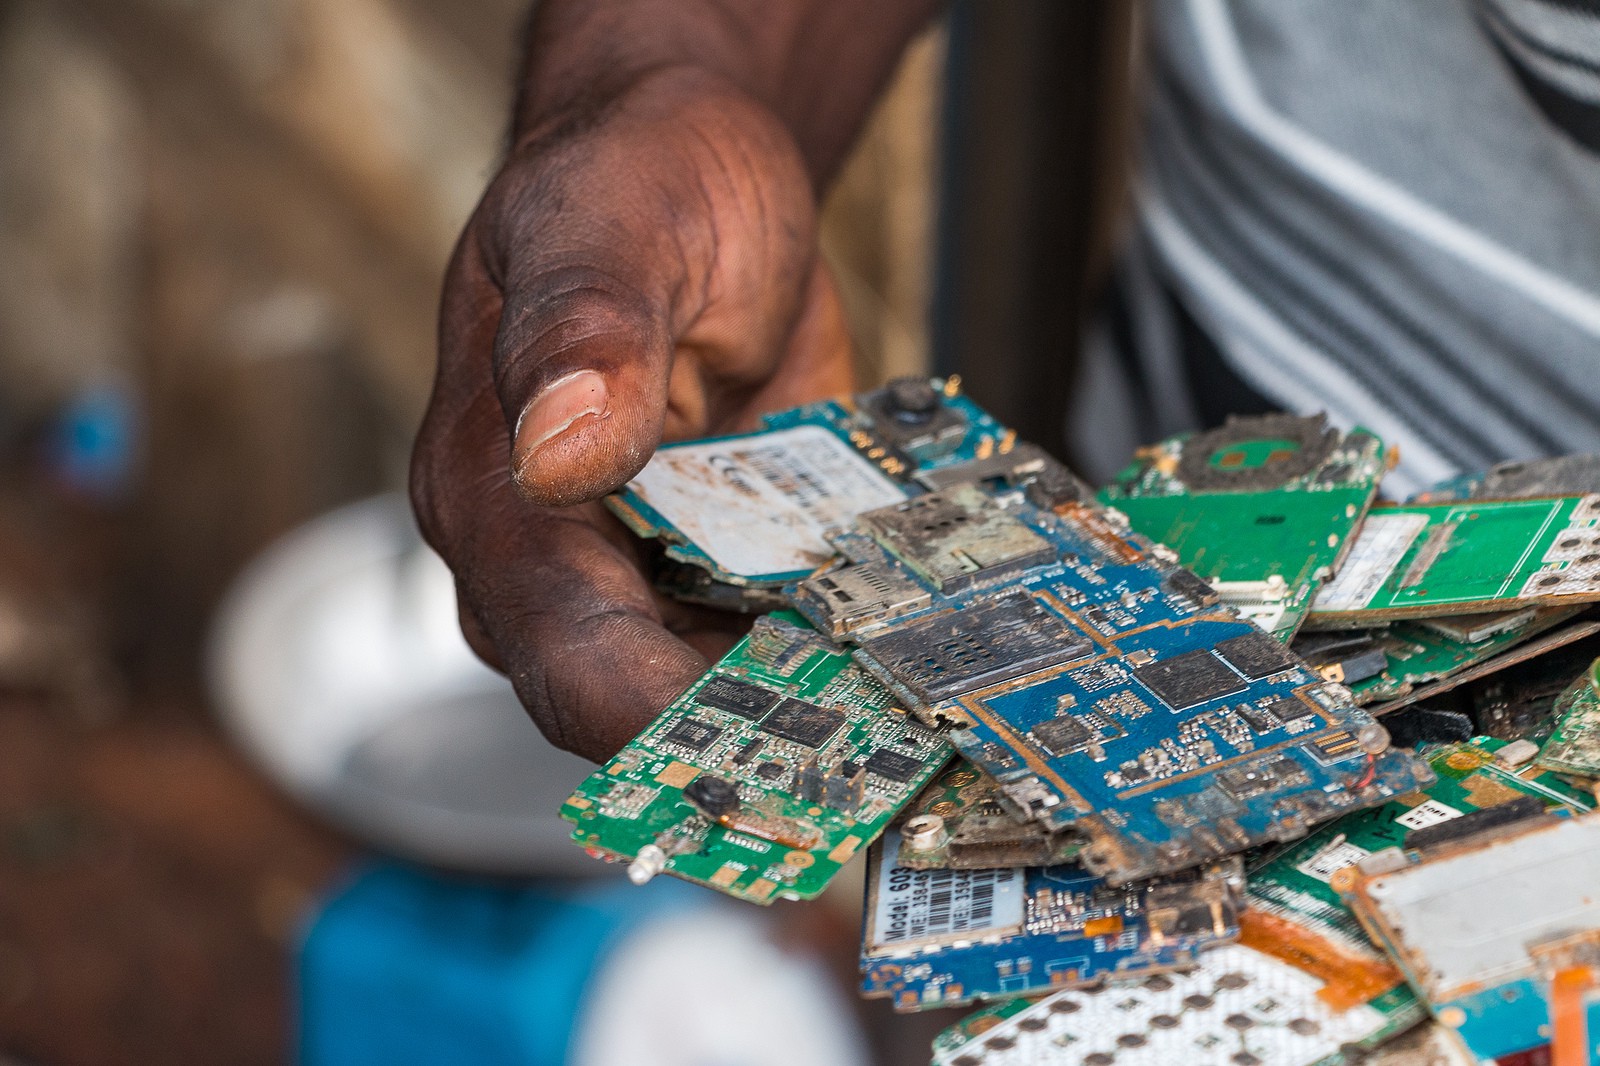 A hand holds a number of used circuit boards from broken phones.